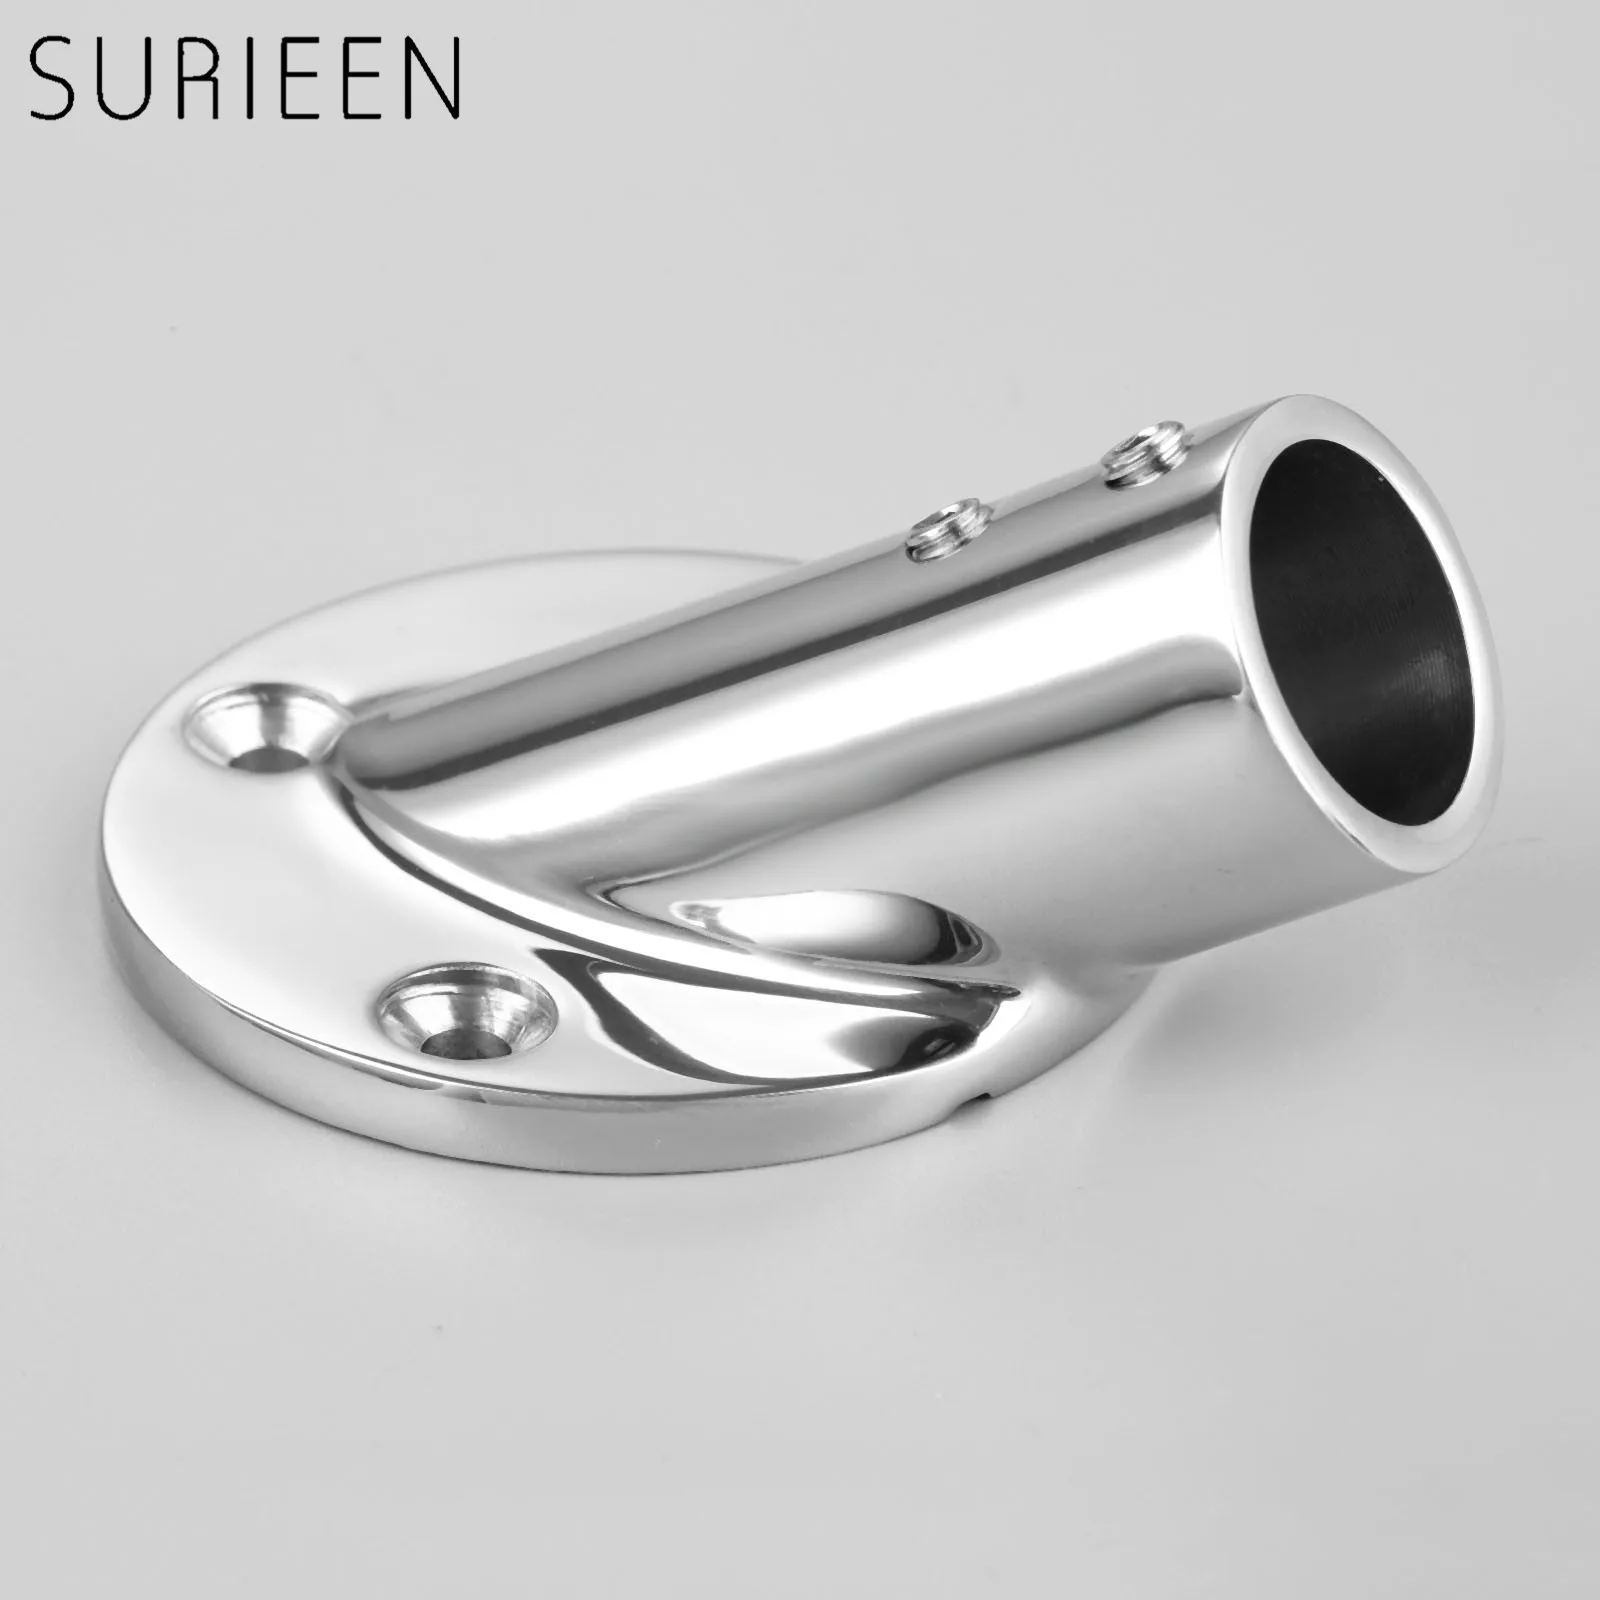 Marine 316 Stainless Steel Boat Hand Rail Fitting 60 Degree Rectangular Base Usd by Boats//Awning